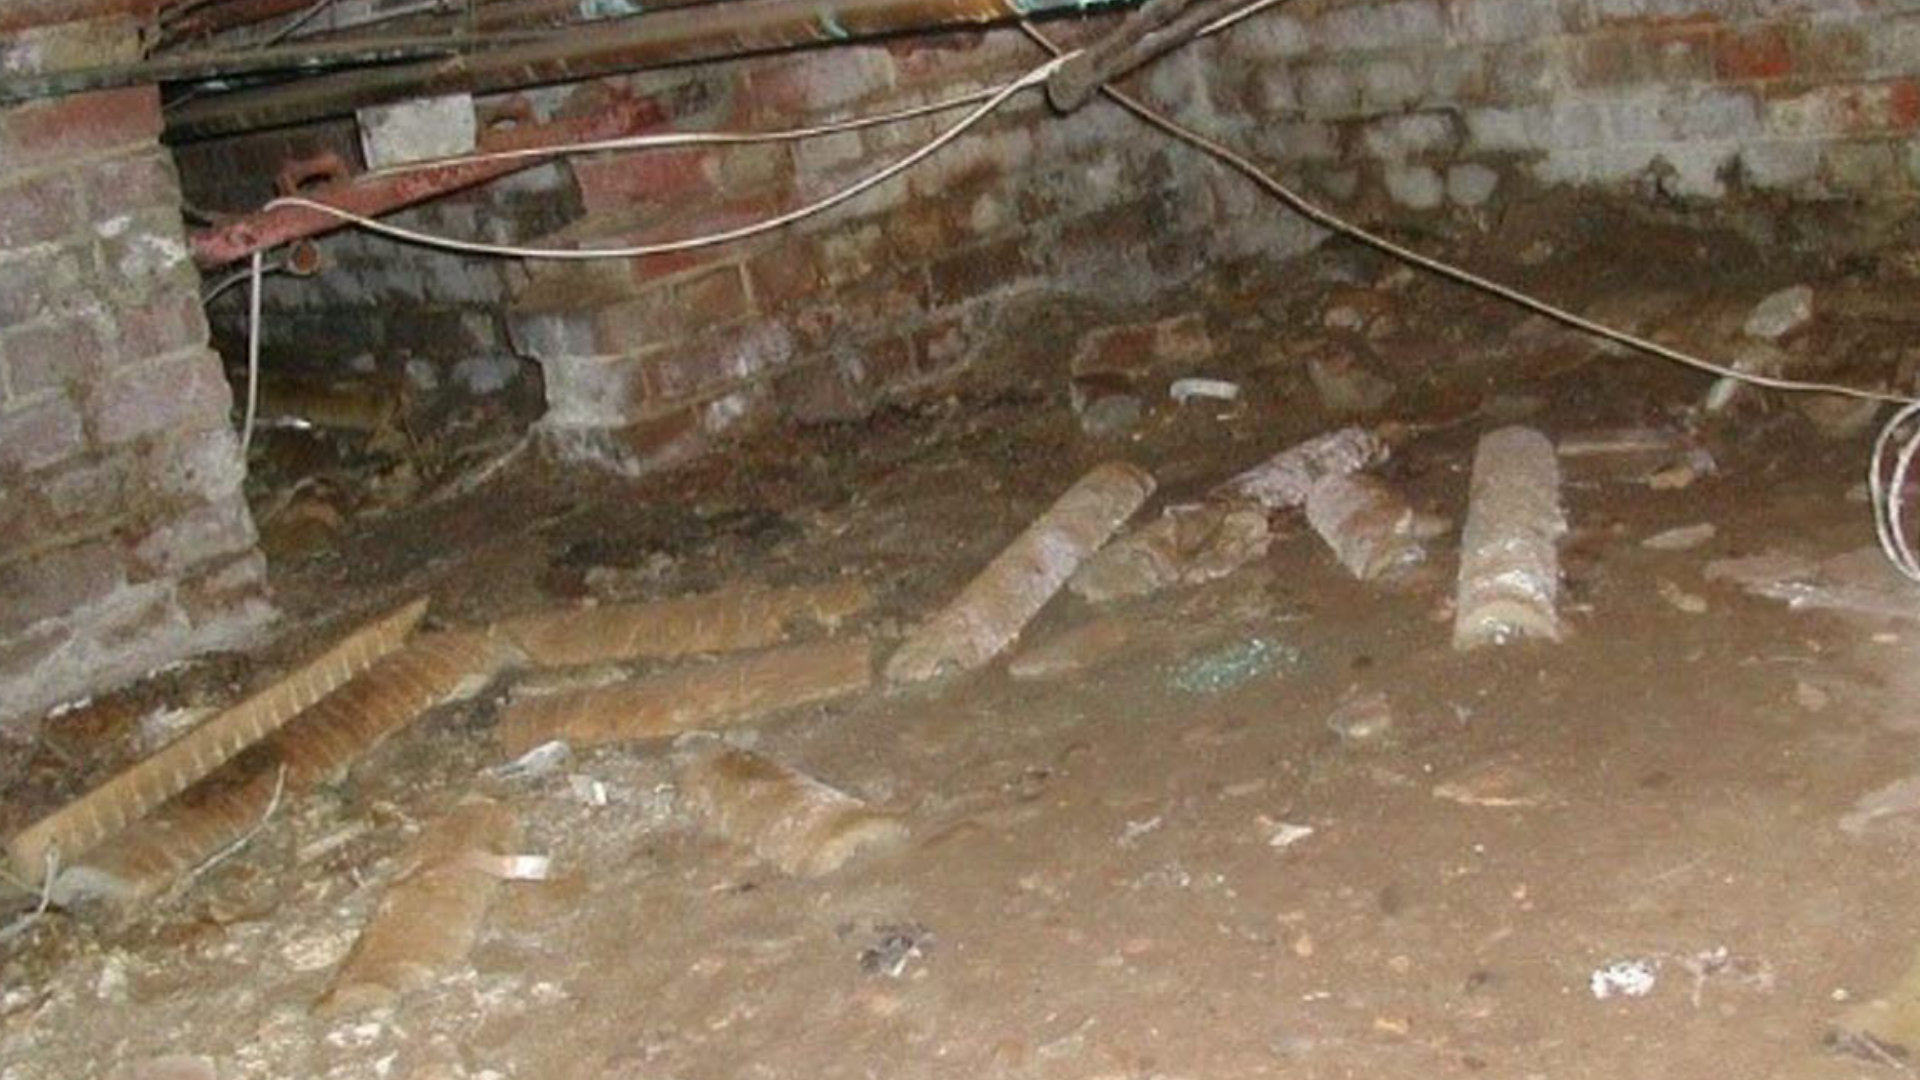 Underfloor crawlspace with l oose sections of asbestos insulation on the floor